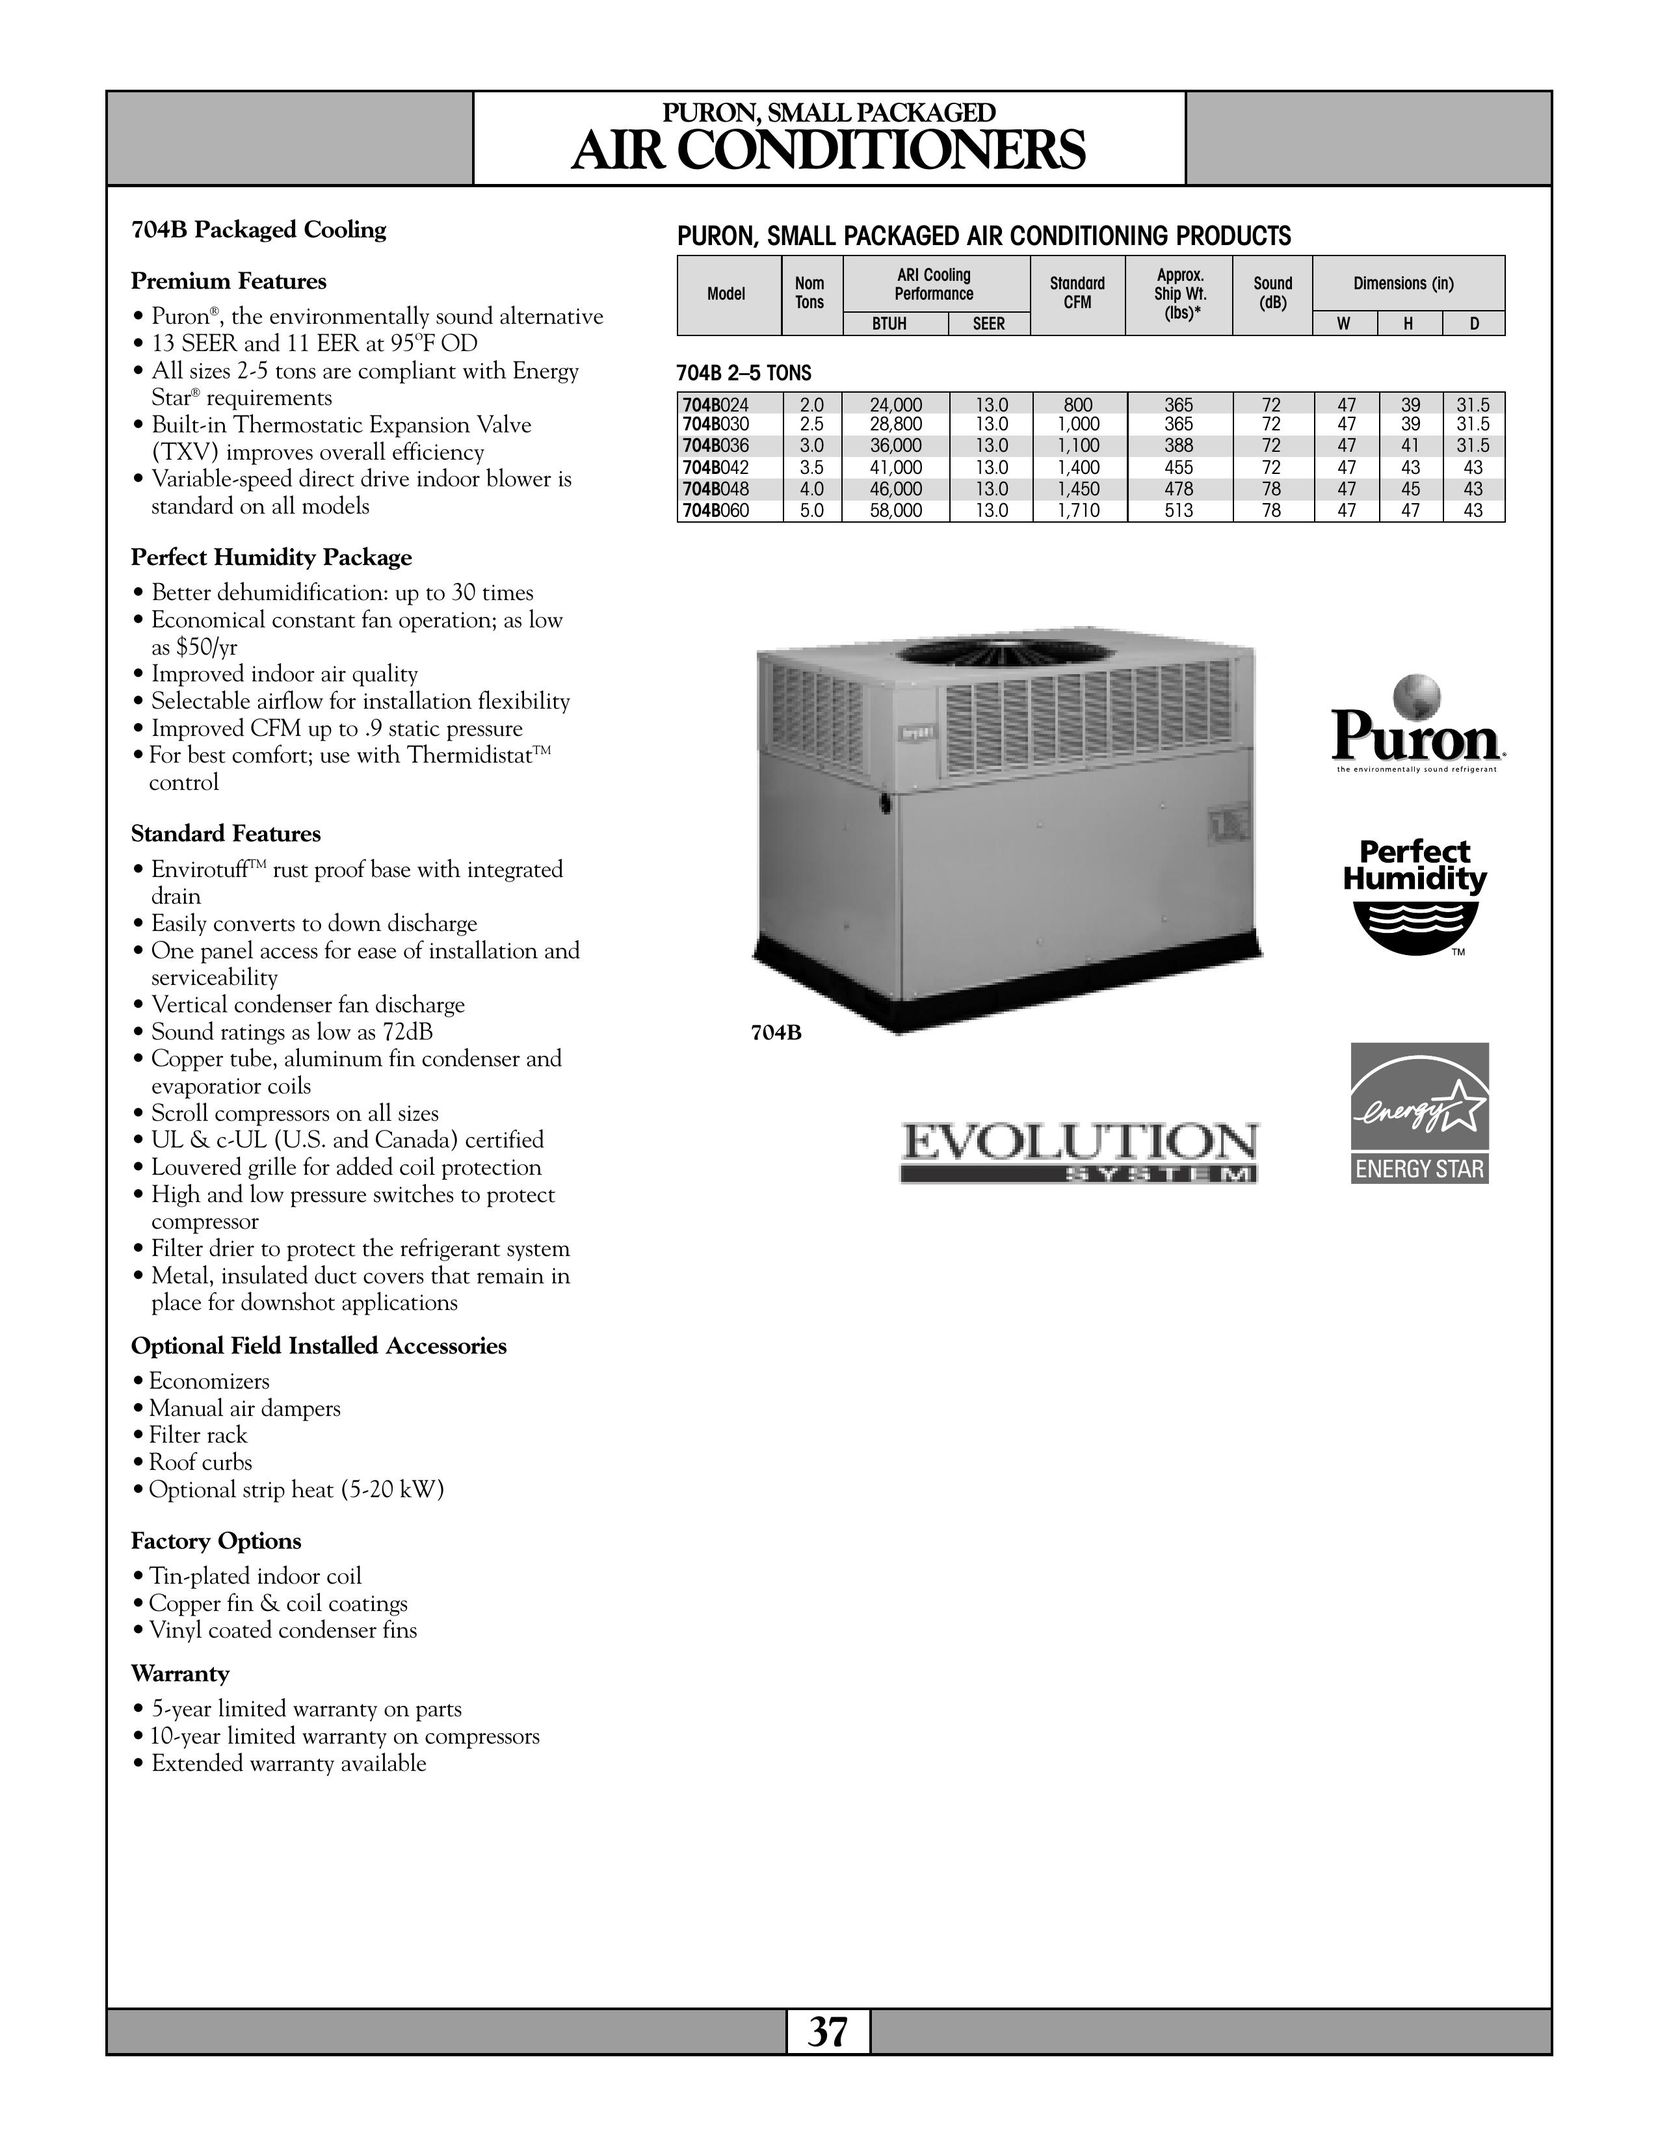 Revolutionary Cooling Systems 704B036 Air Conditioner User Manual